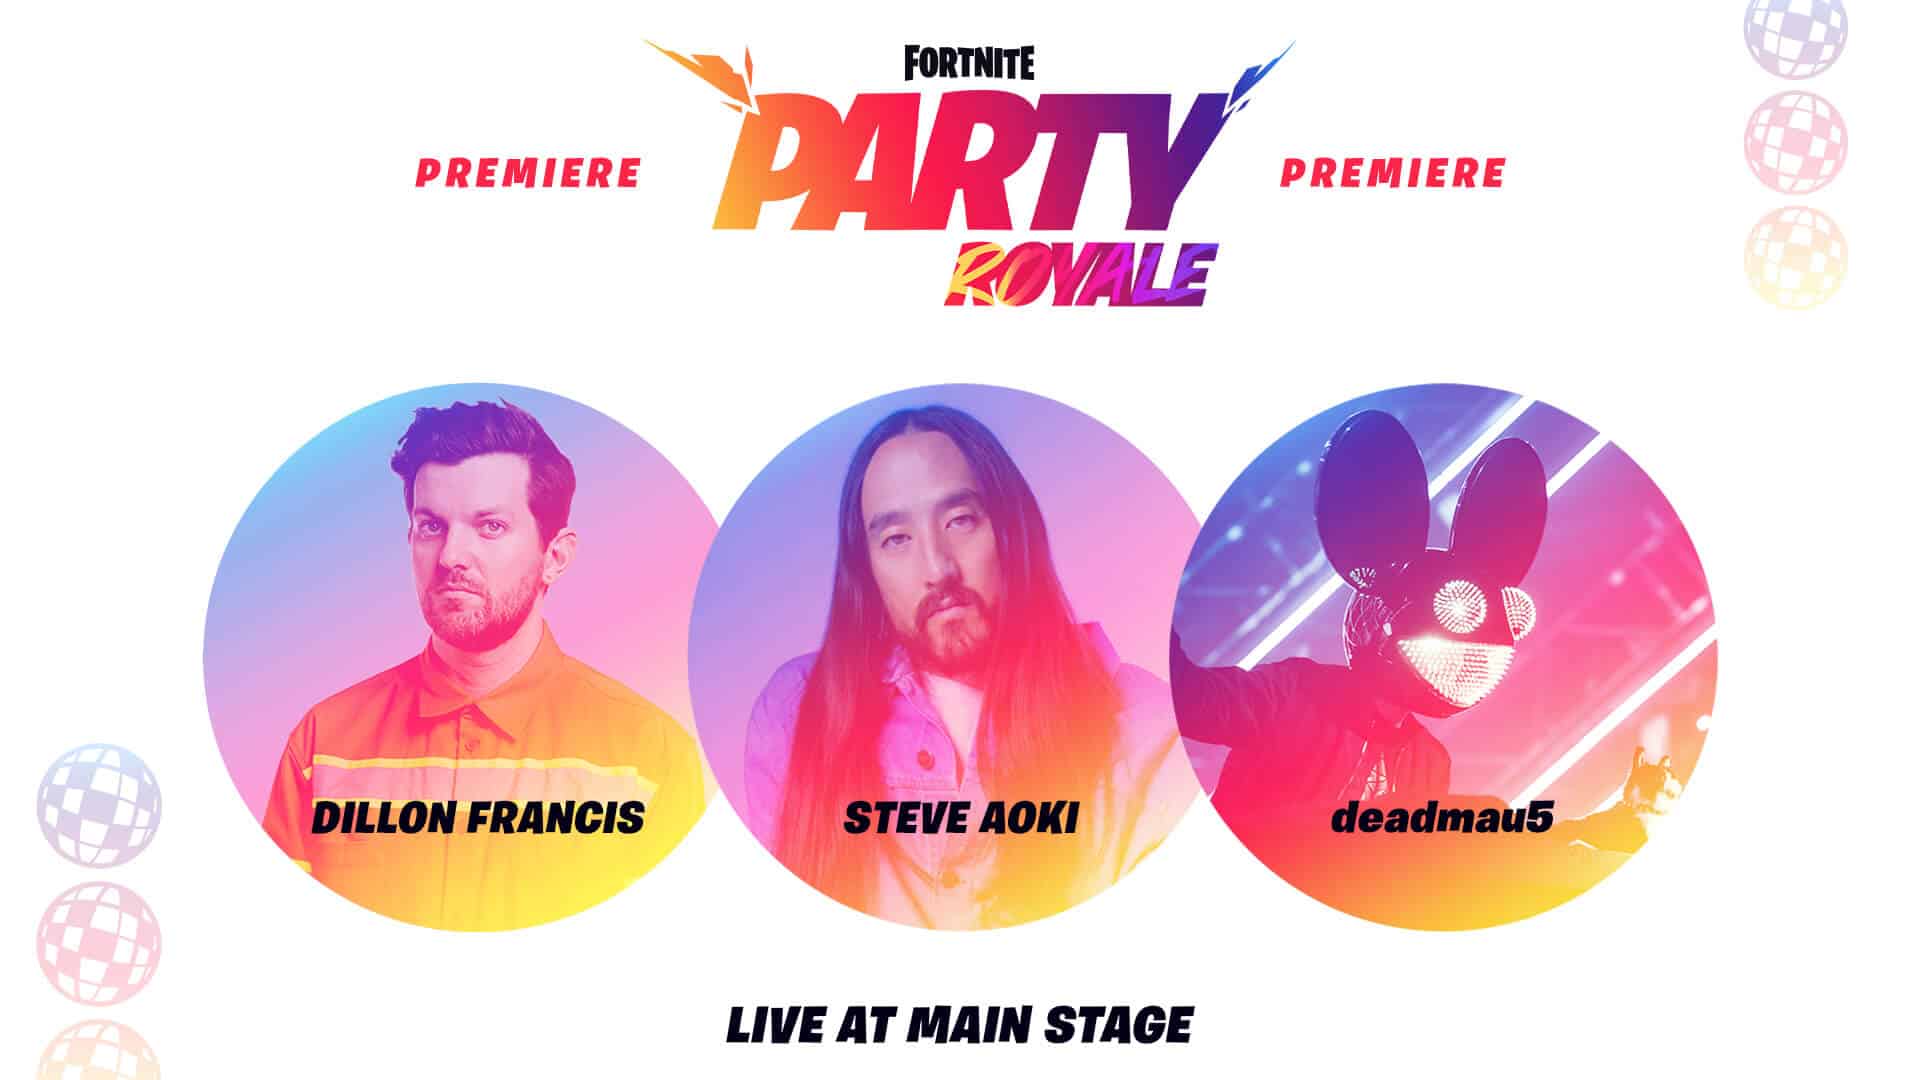 Fortnite Party Royale to Feature Dillon Francis, Steve Aoki, and deadmau5 Concerts